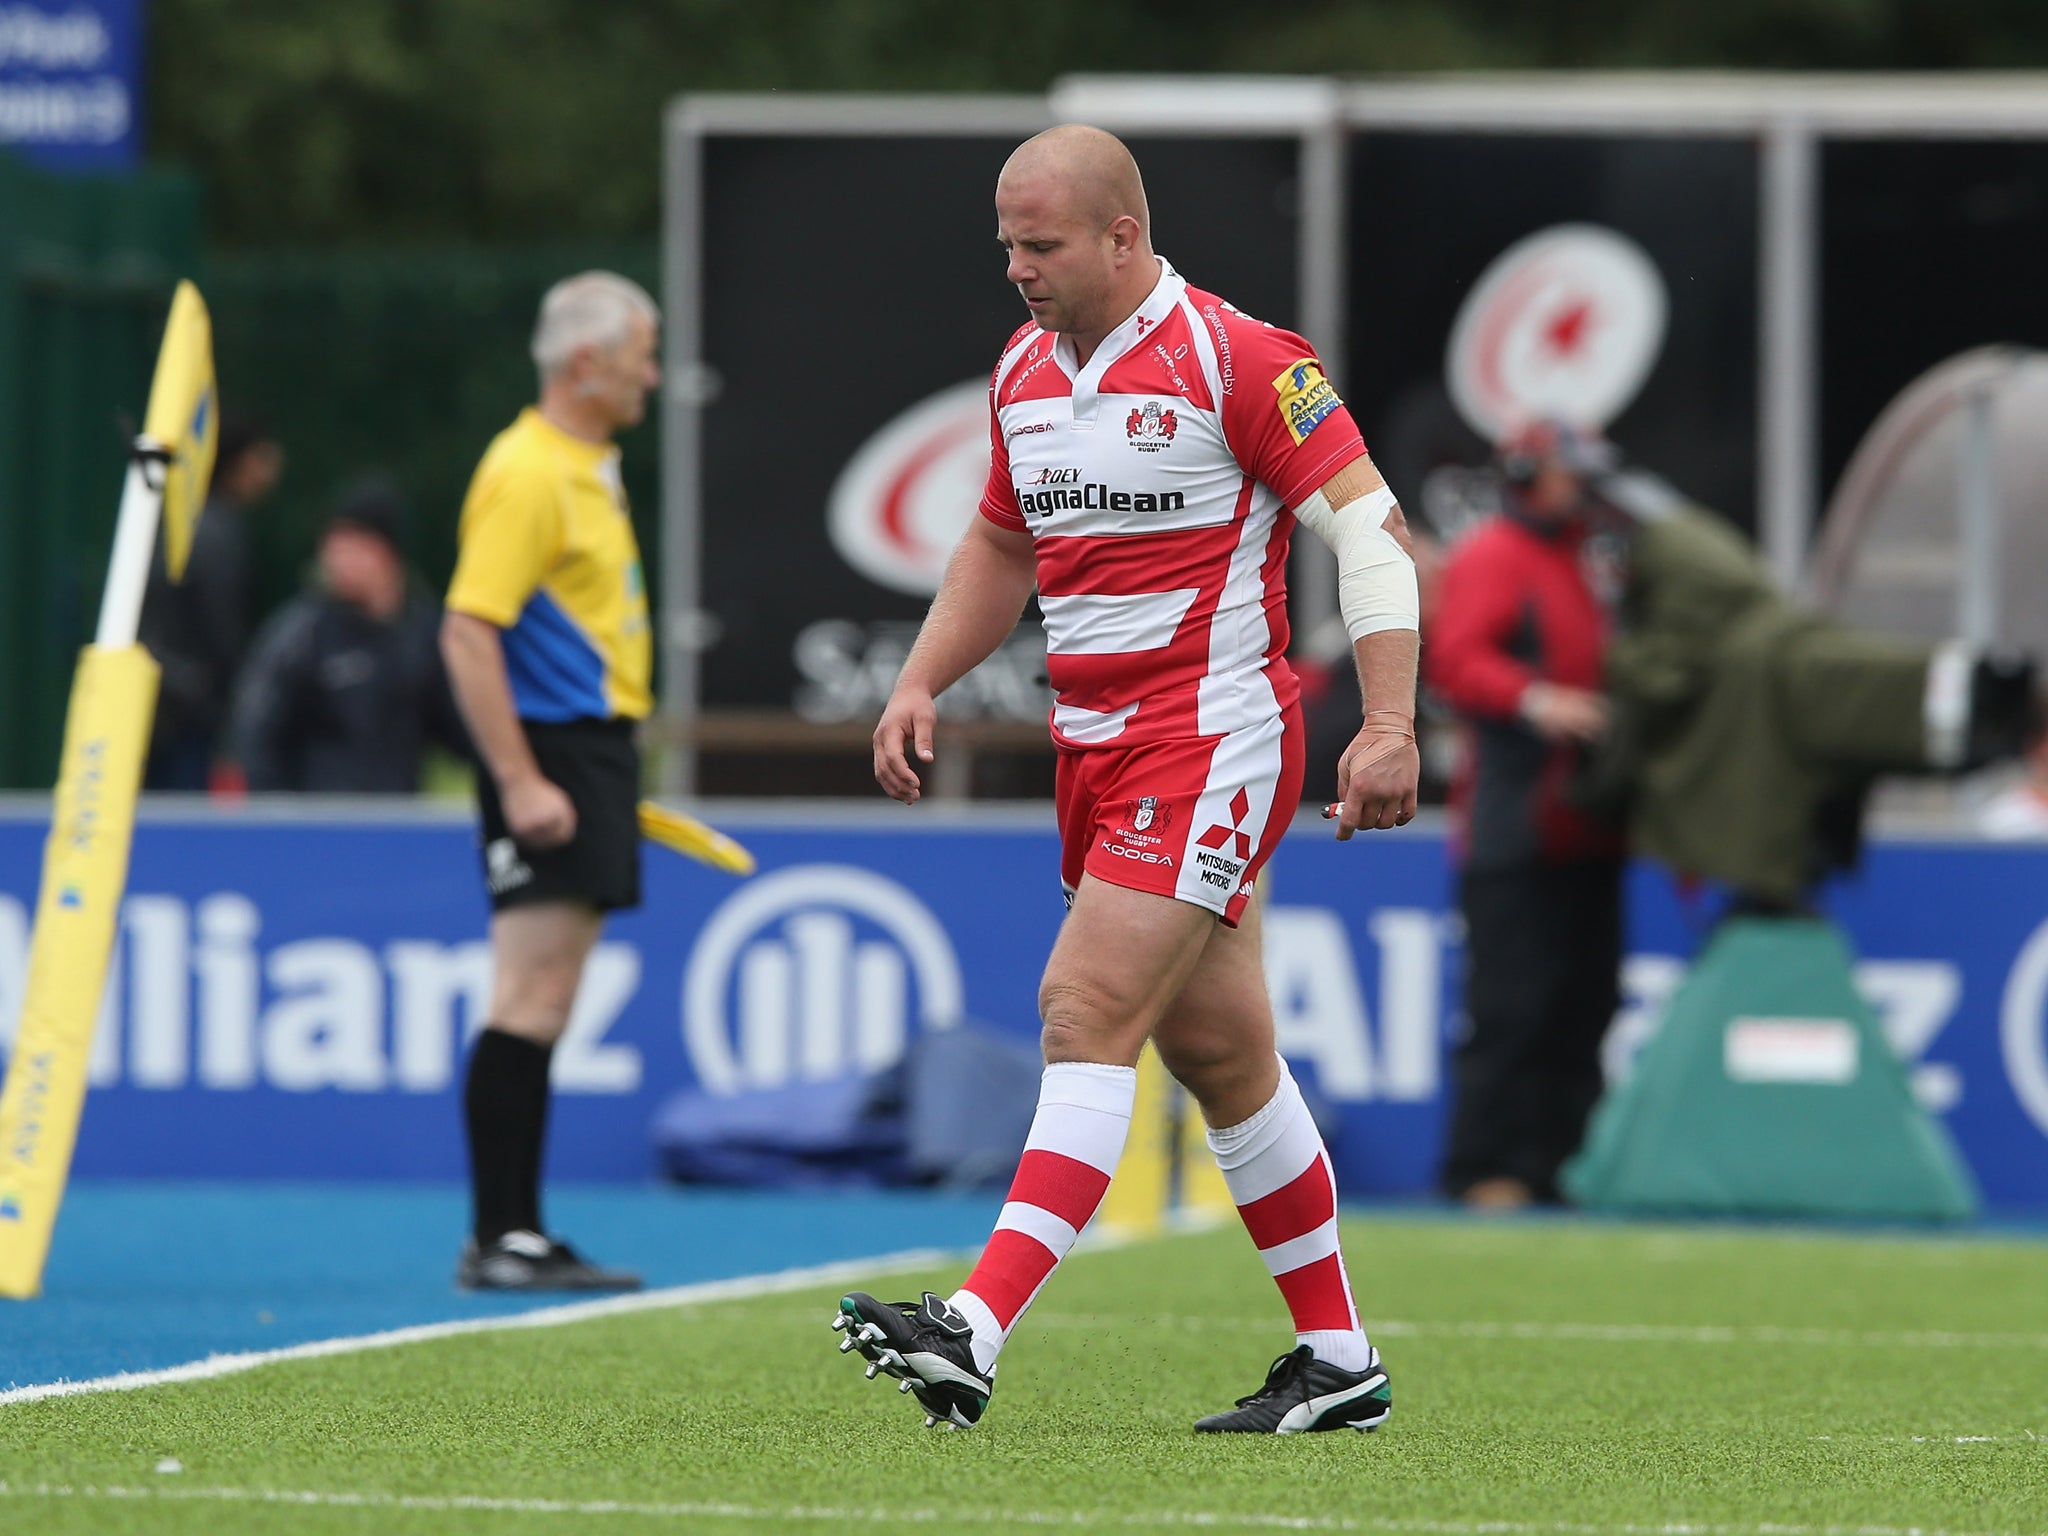 Nick Wood was sent off after just eight minutes when Gloucester faced Saracens